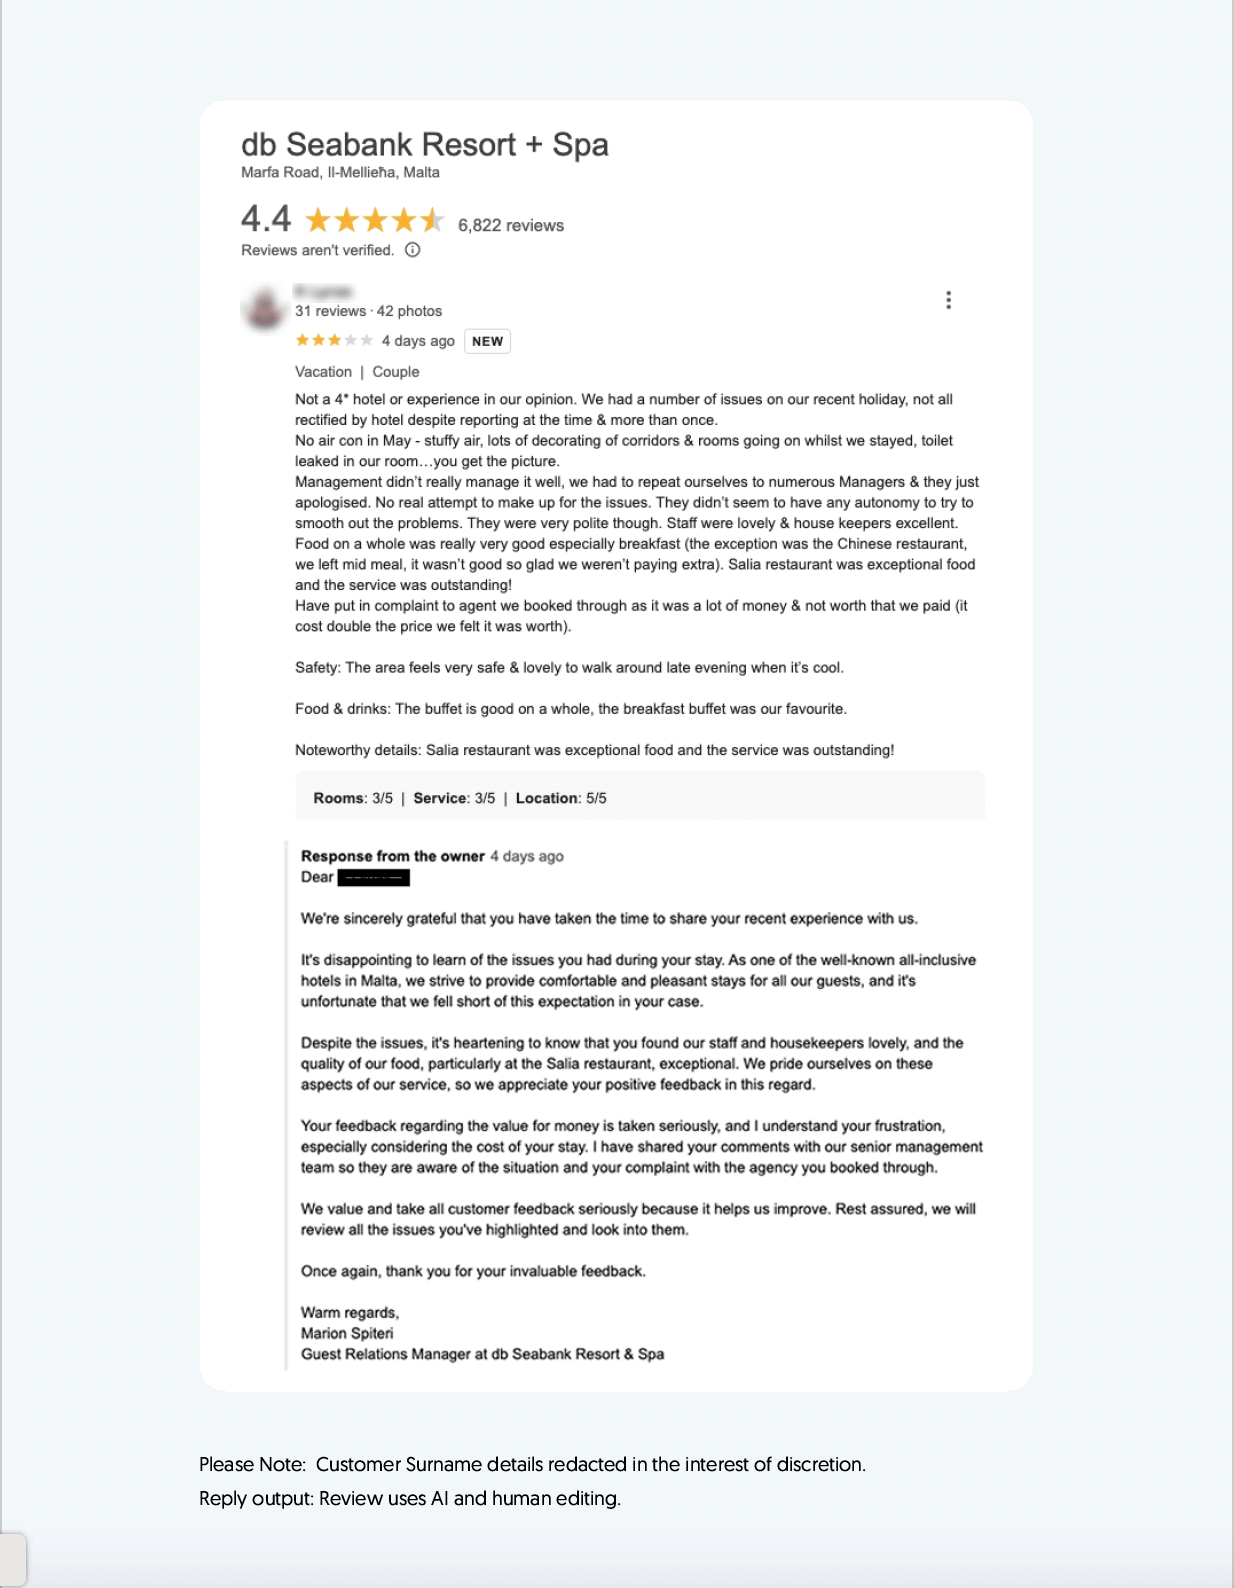 AI Negative Review Response for Hotel